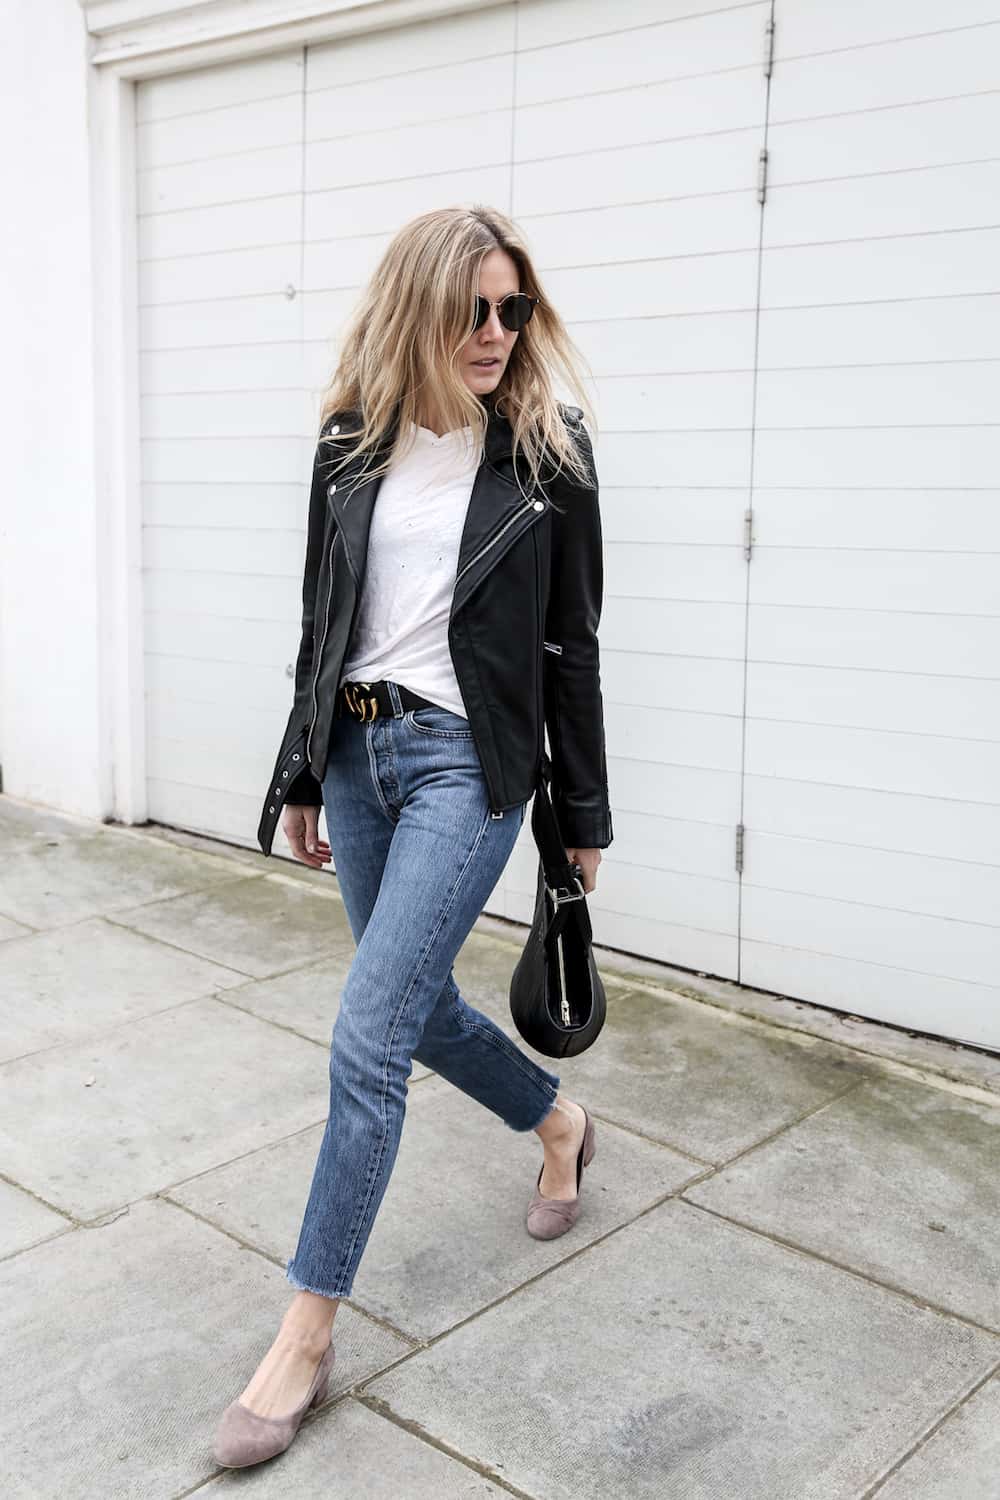 image of a woman wearing a leather jacket, white t-shirt, black Gucci belt, and blue jeans, with taupe pumps